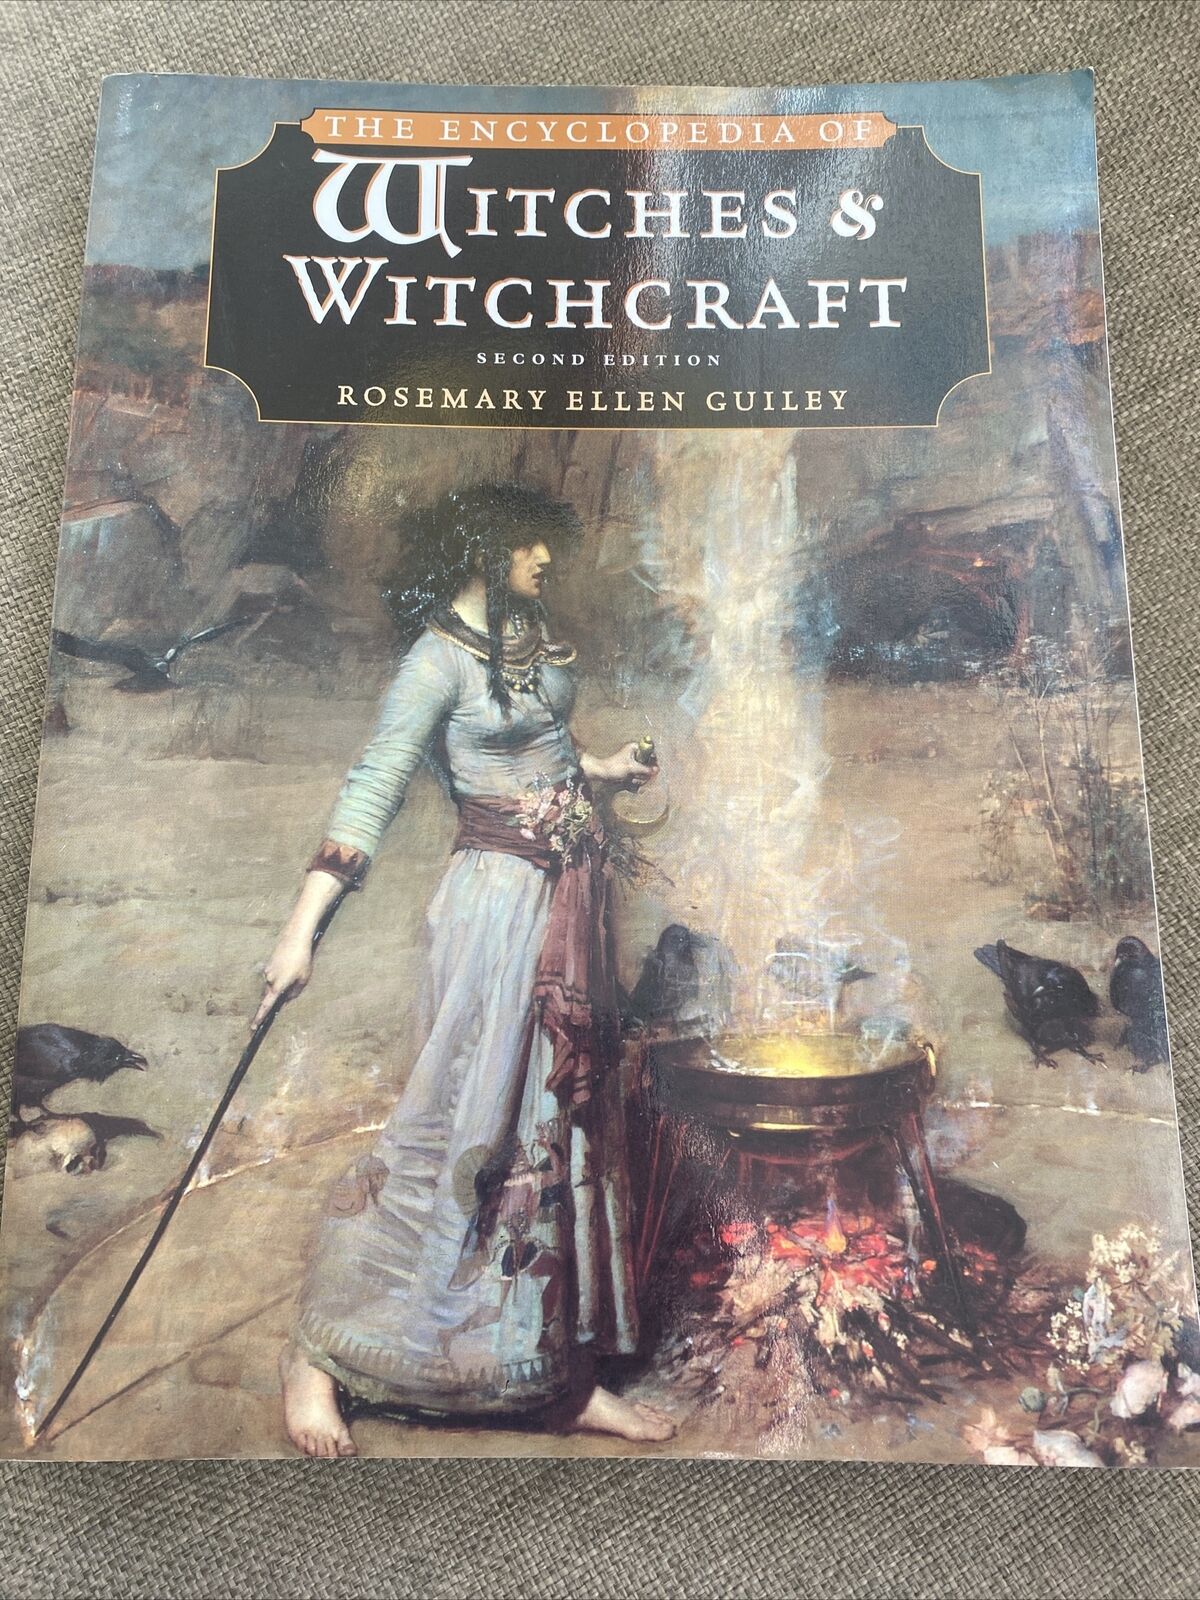 The Encyclopedia of Witches and Witchcraft by Rosemary ellen Guiley (1999, Trade